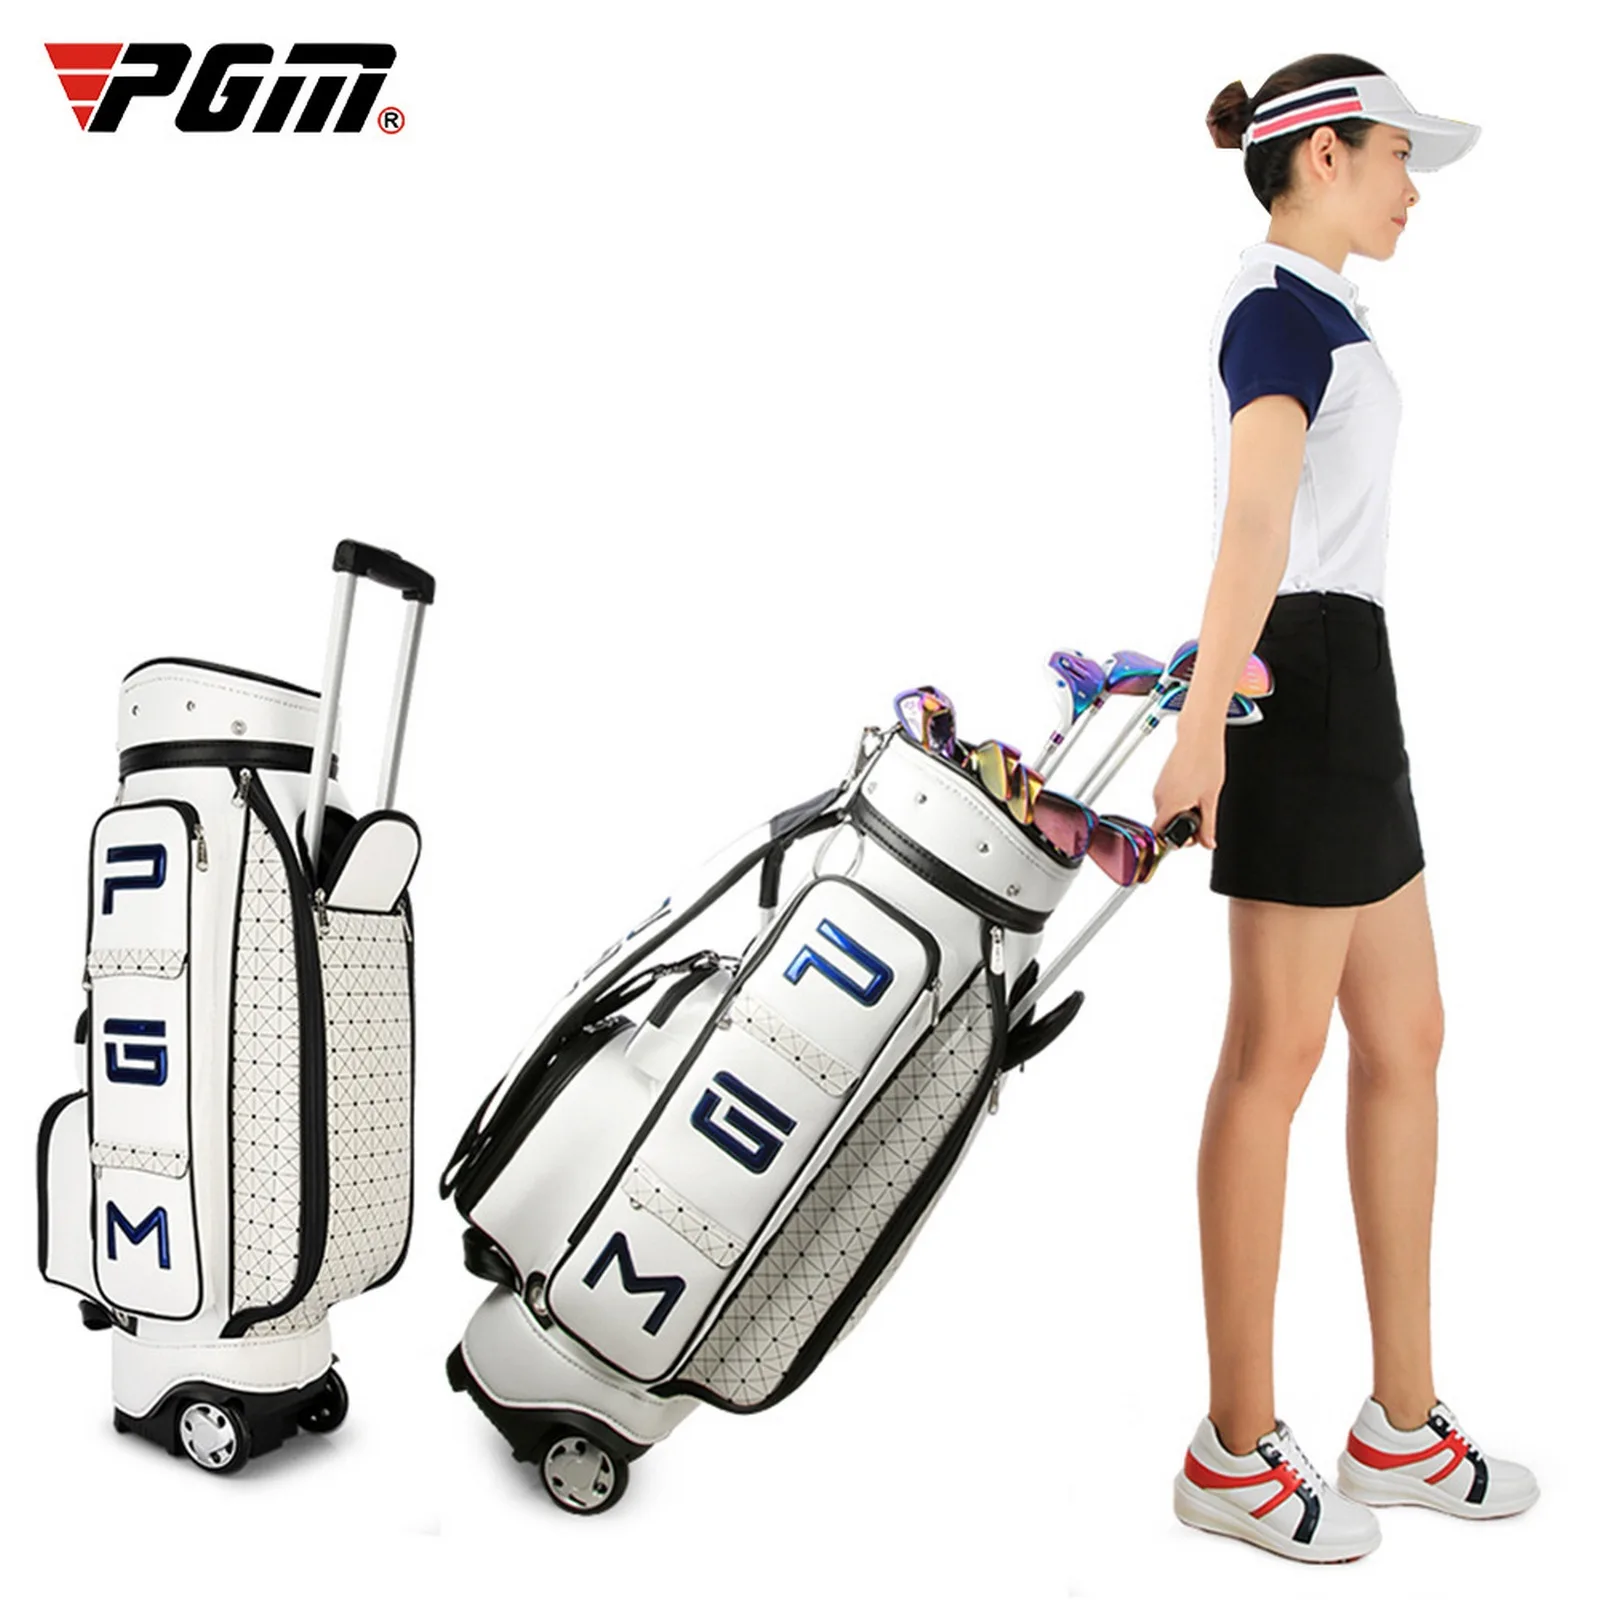 Retractable Golf Bag Standard Golf Aviation Bag Portable Pu Leather Golf Standard Bag Large Capacity Travel Package With Wheels